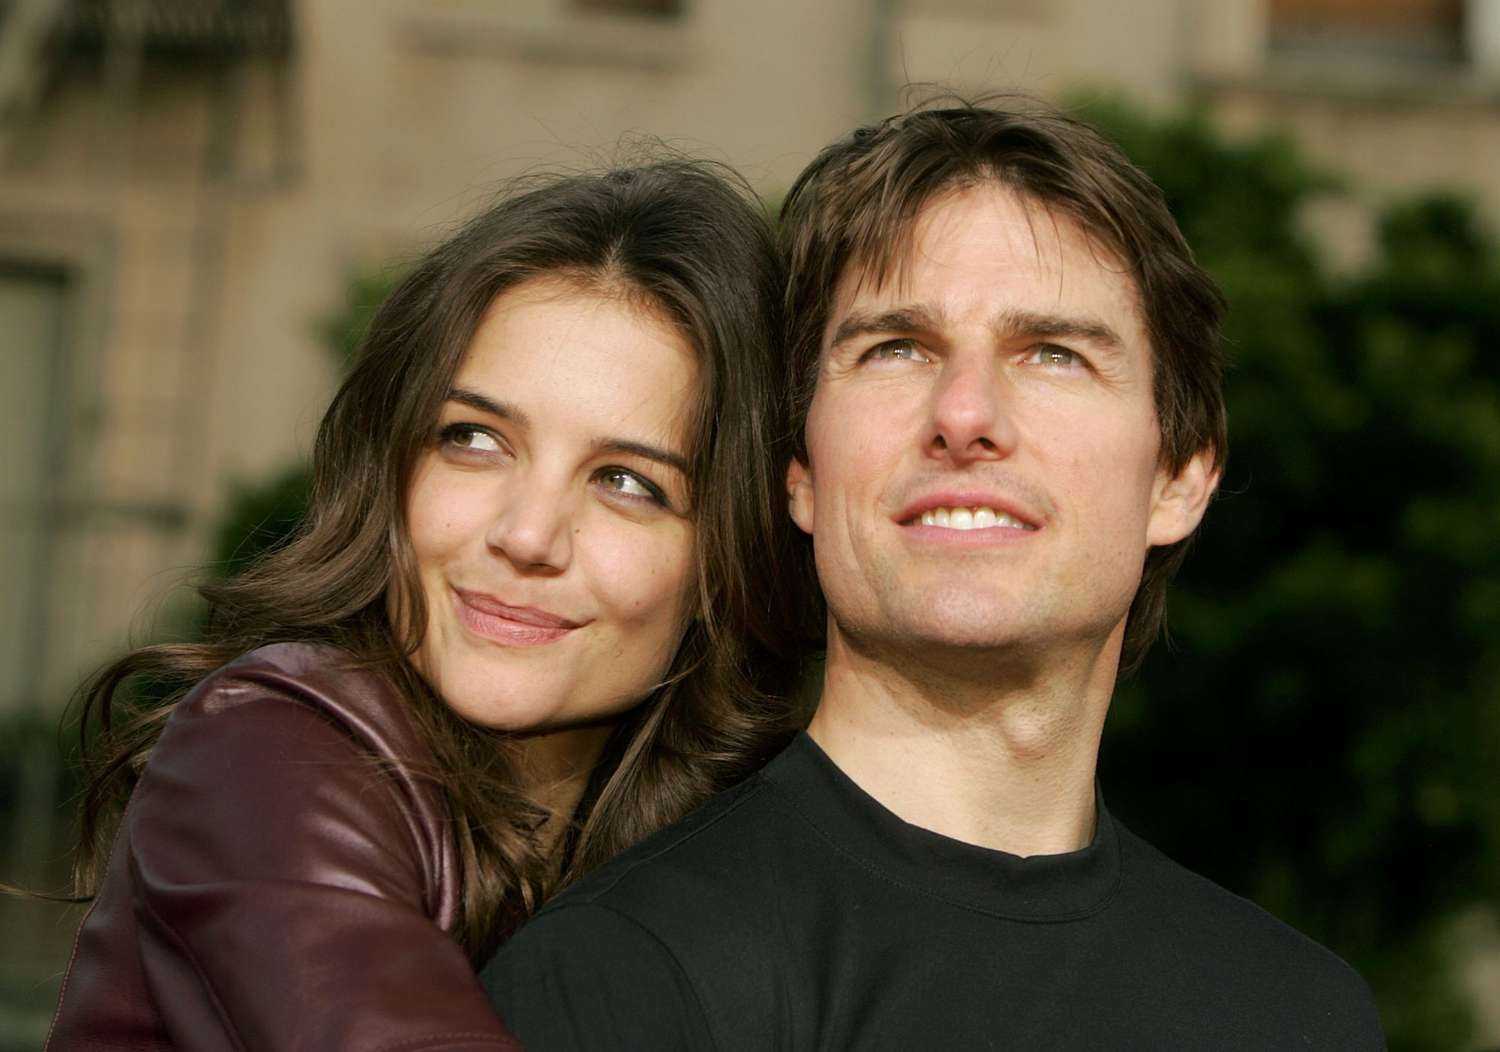 Famous love stories actually creepy - katie holmes and tom cruise